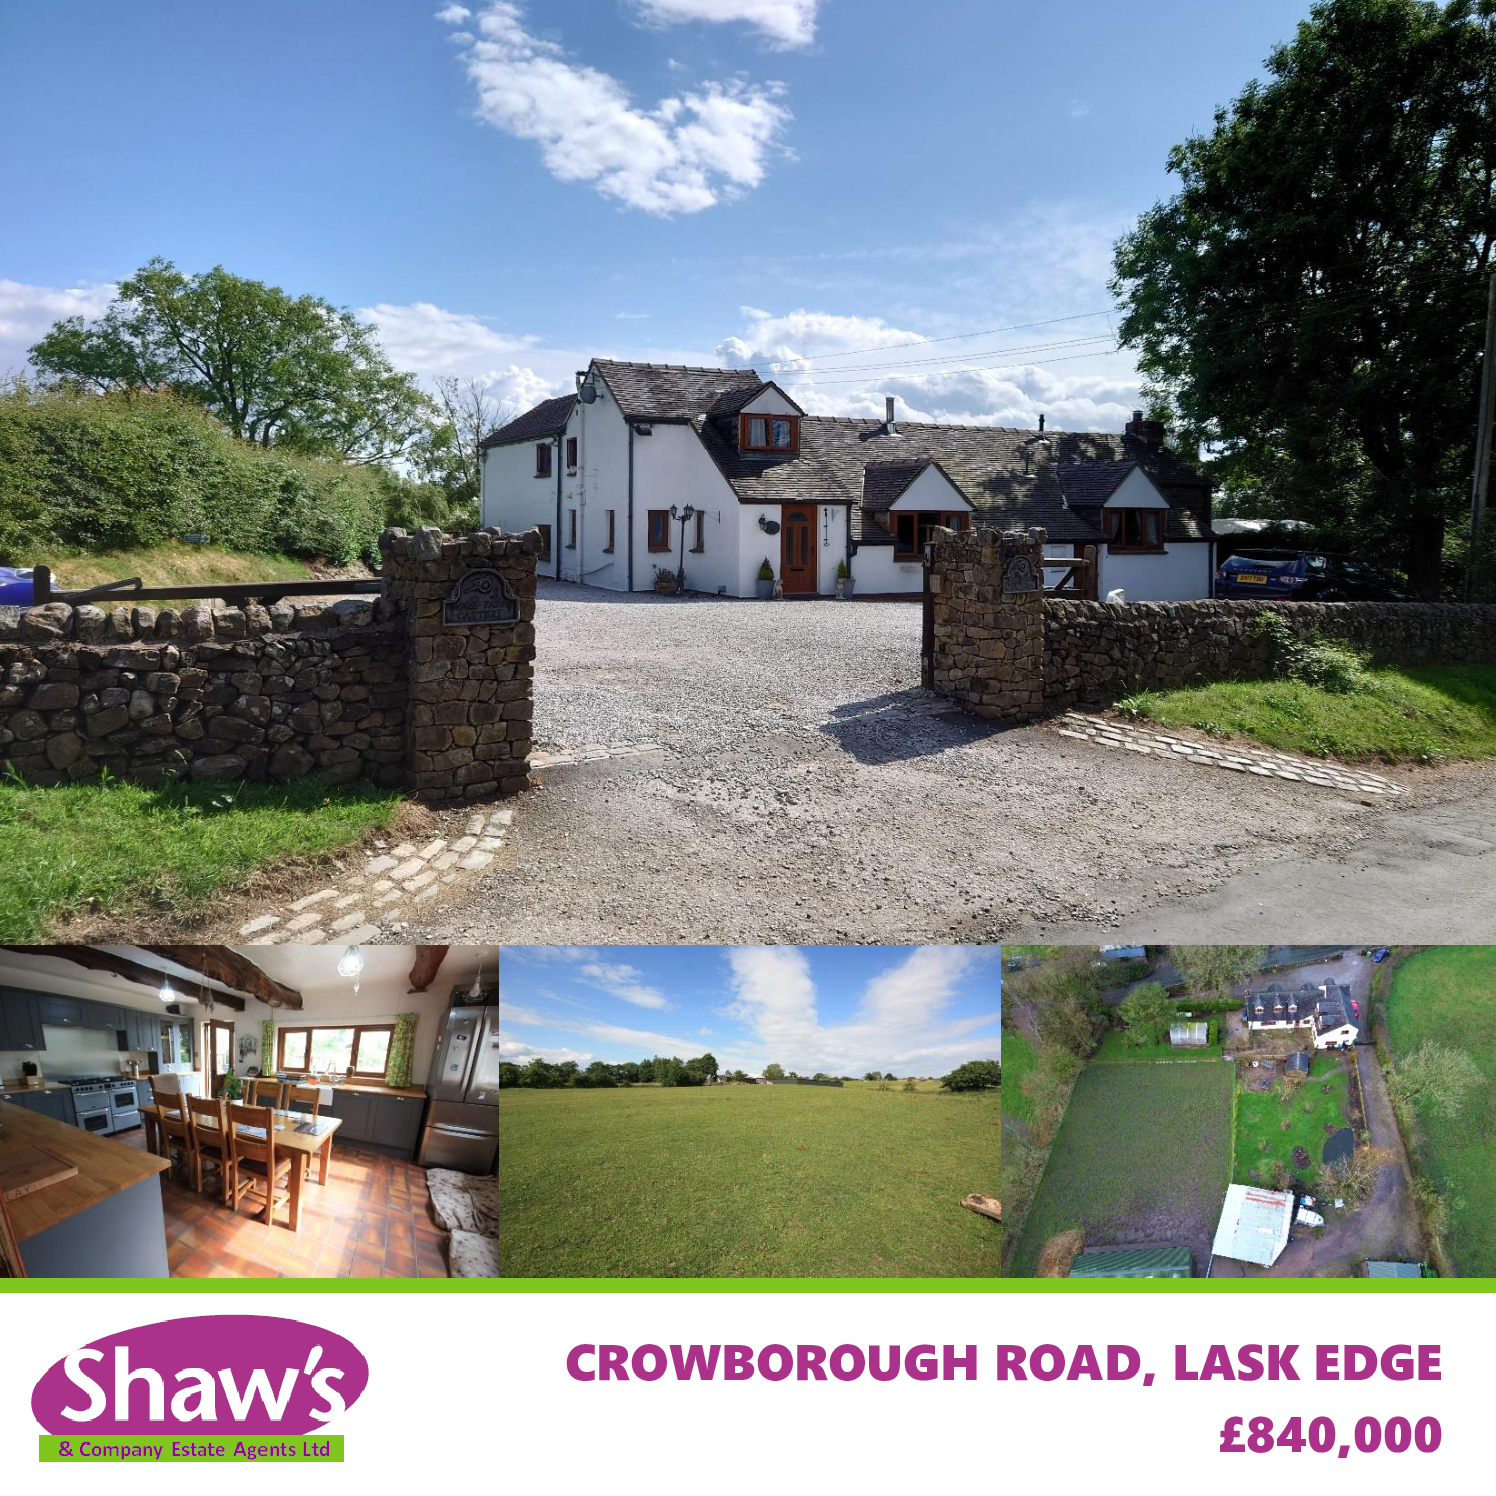 NEW & FEATURED PROPERTIES OF THE WEEK